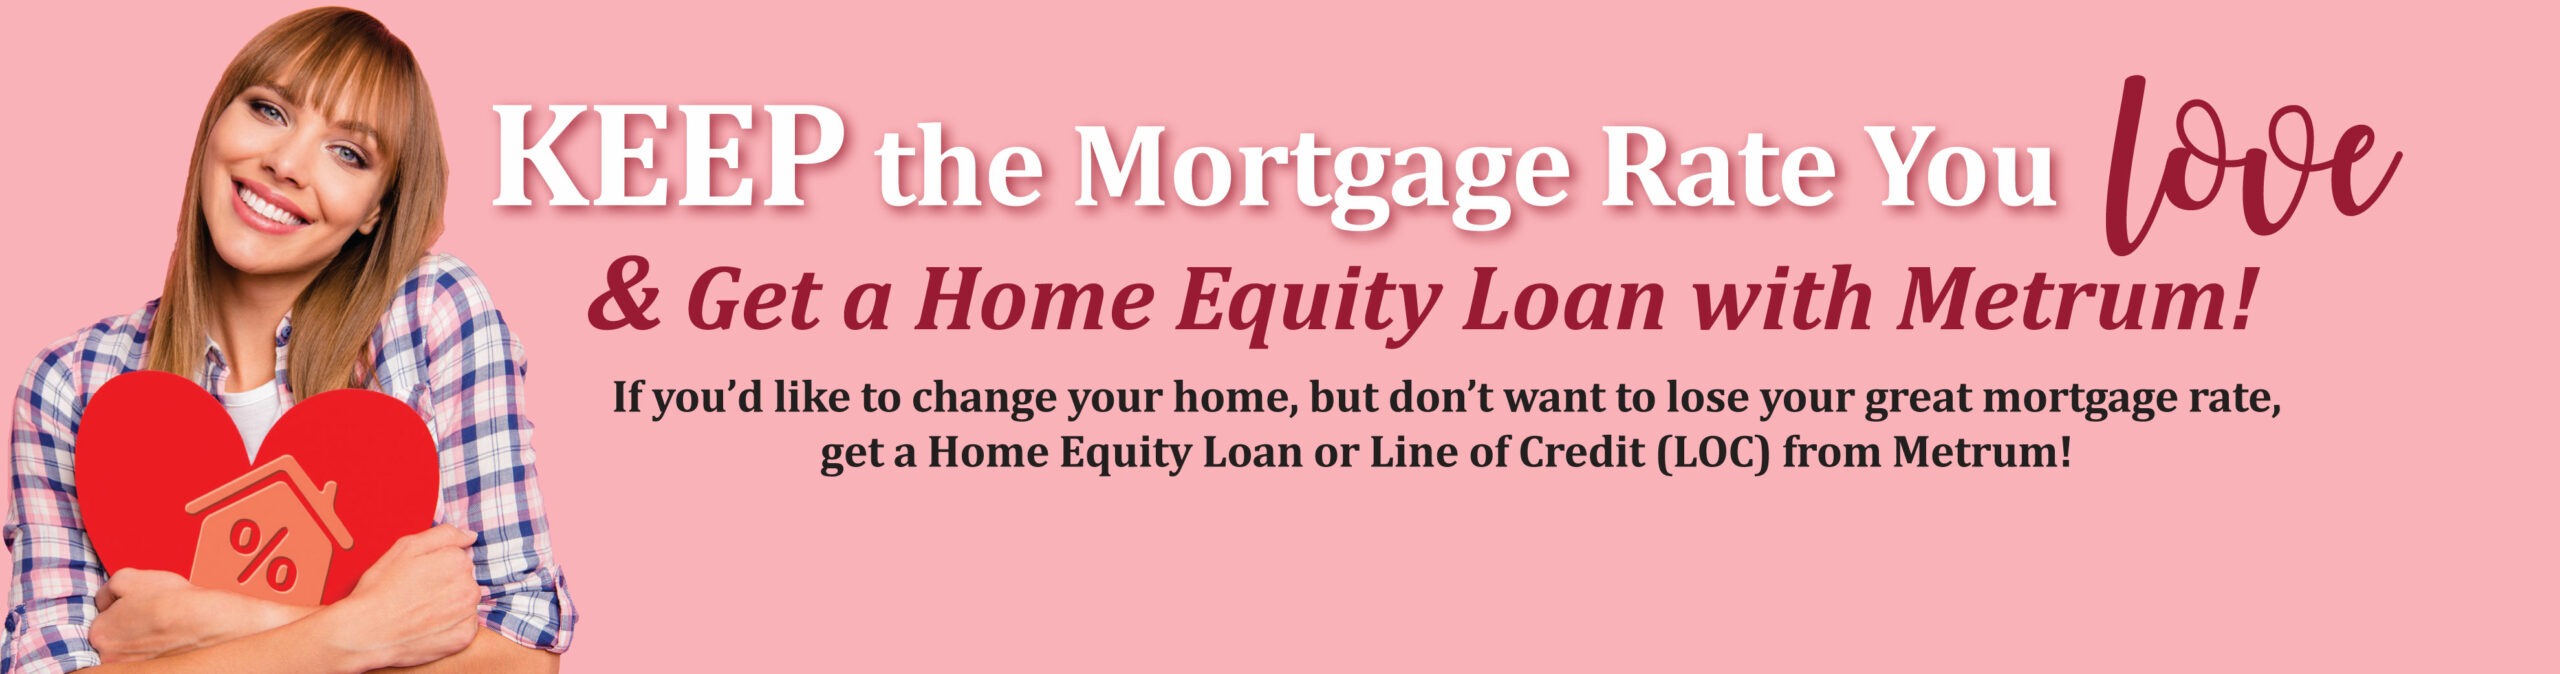 Keep the Mortgage Rate you LOVE & get a home equity loan with Metrum!